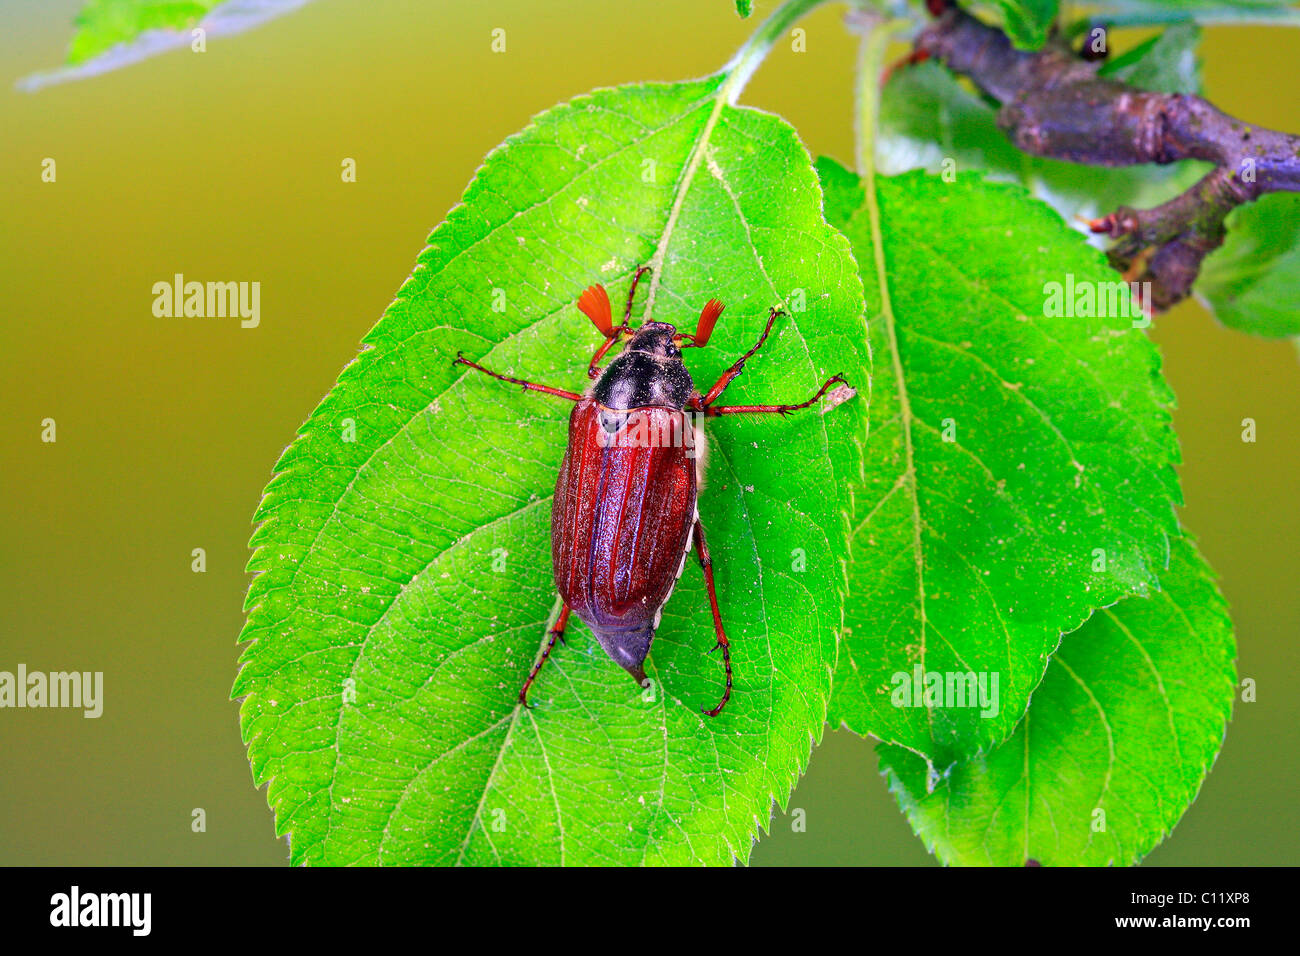 May bug or Cockchafer (Melolontha melolontha) on the leave of an apple tree Stock Photo